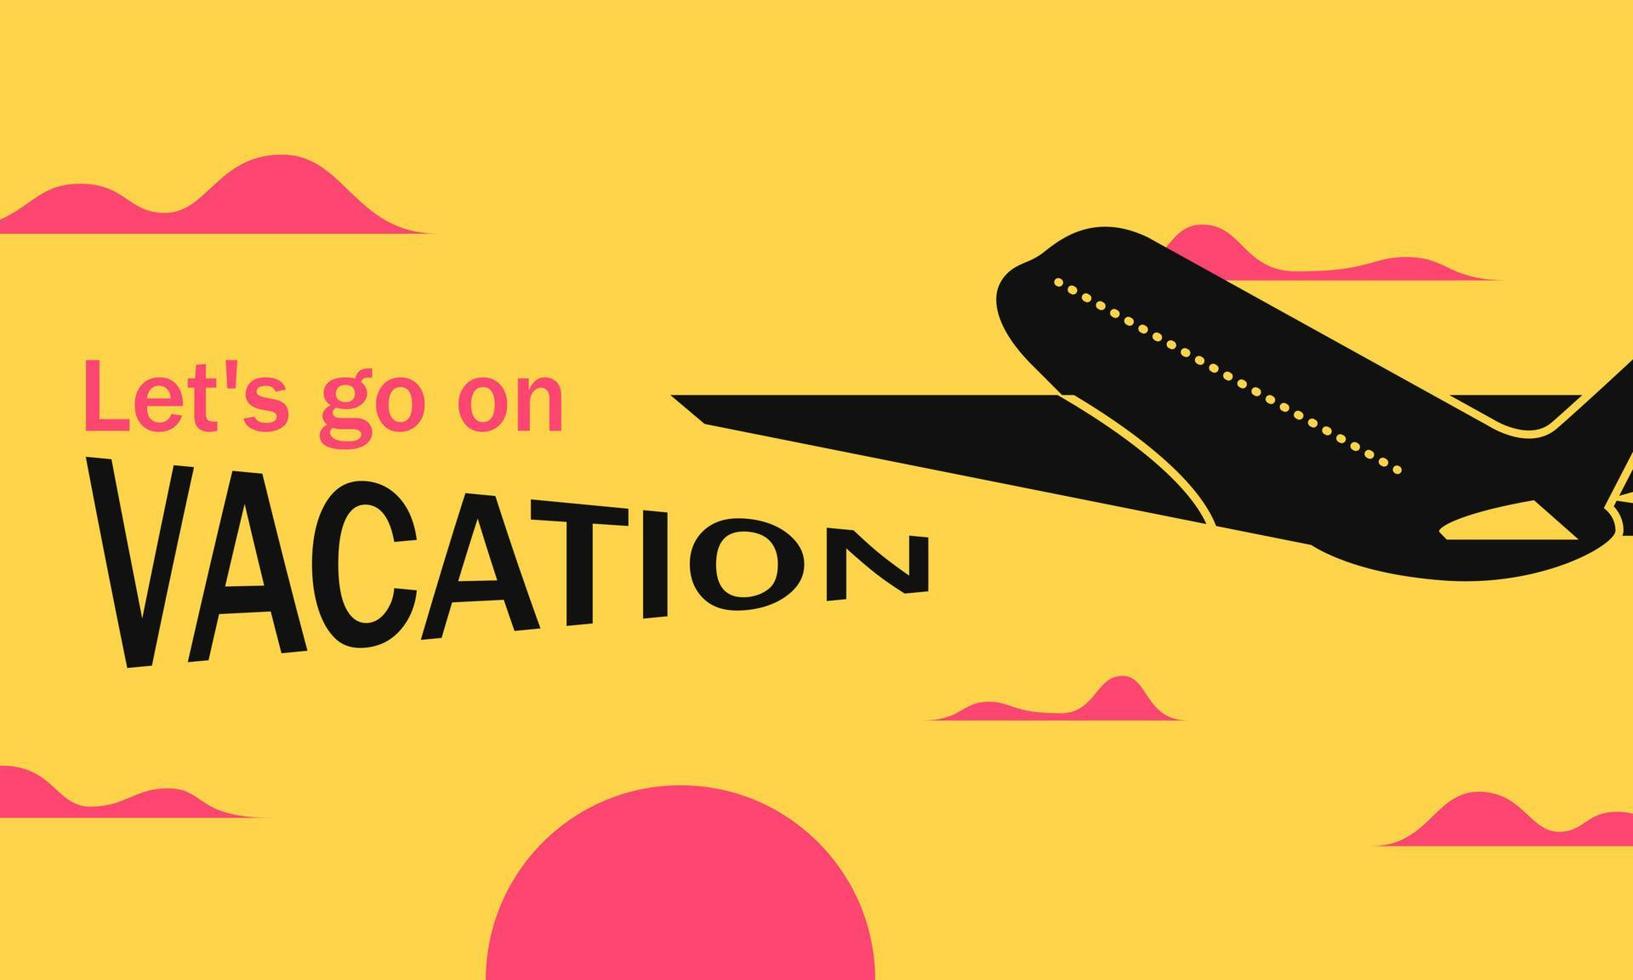 Lets go on vacation text with airplane and sunset on background. Concept summer vacation with plane banner vector